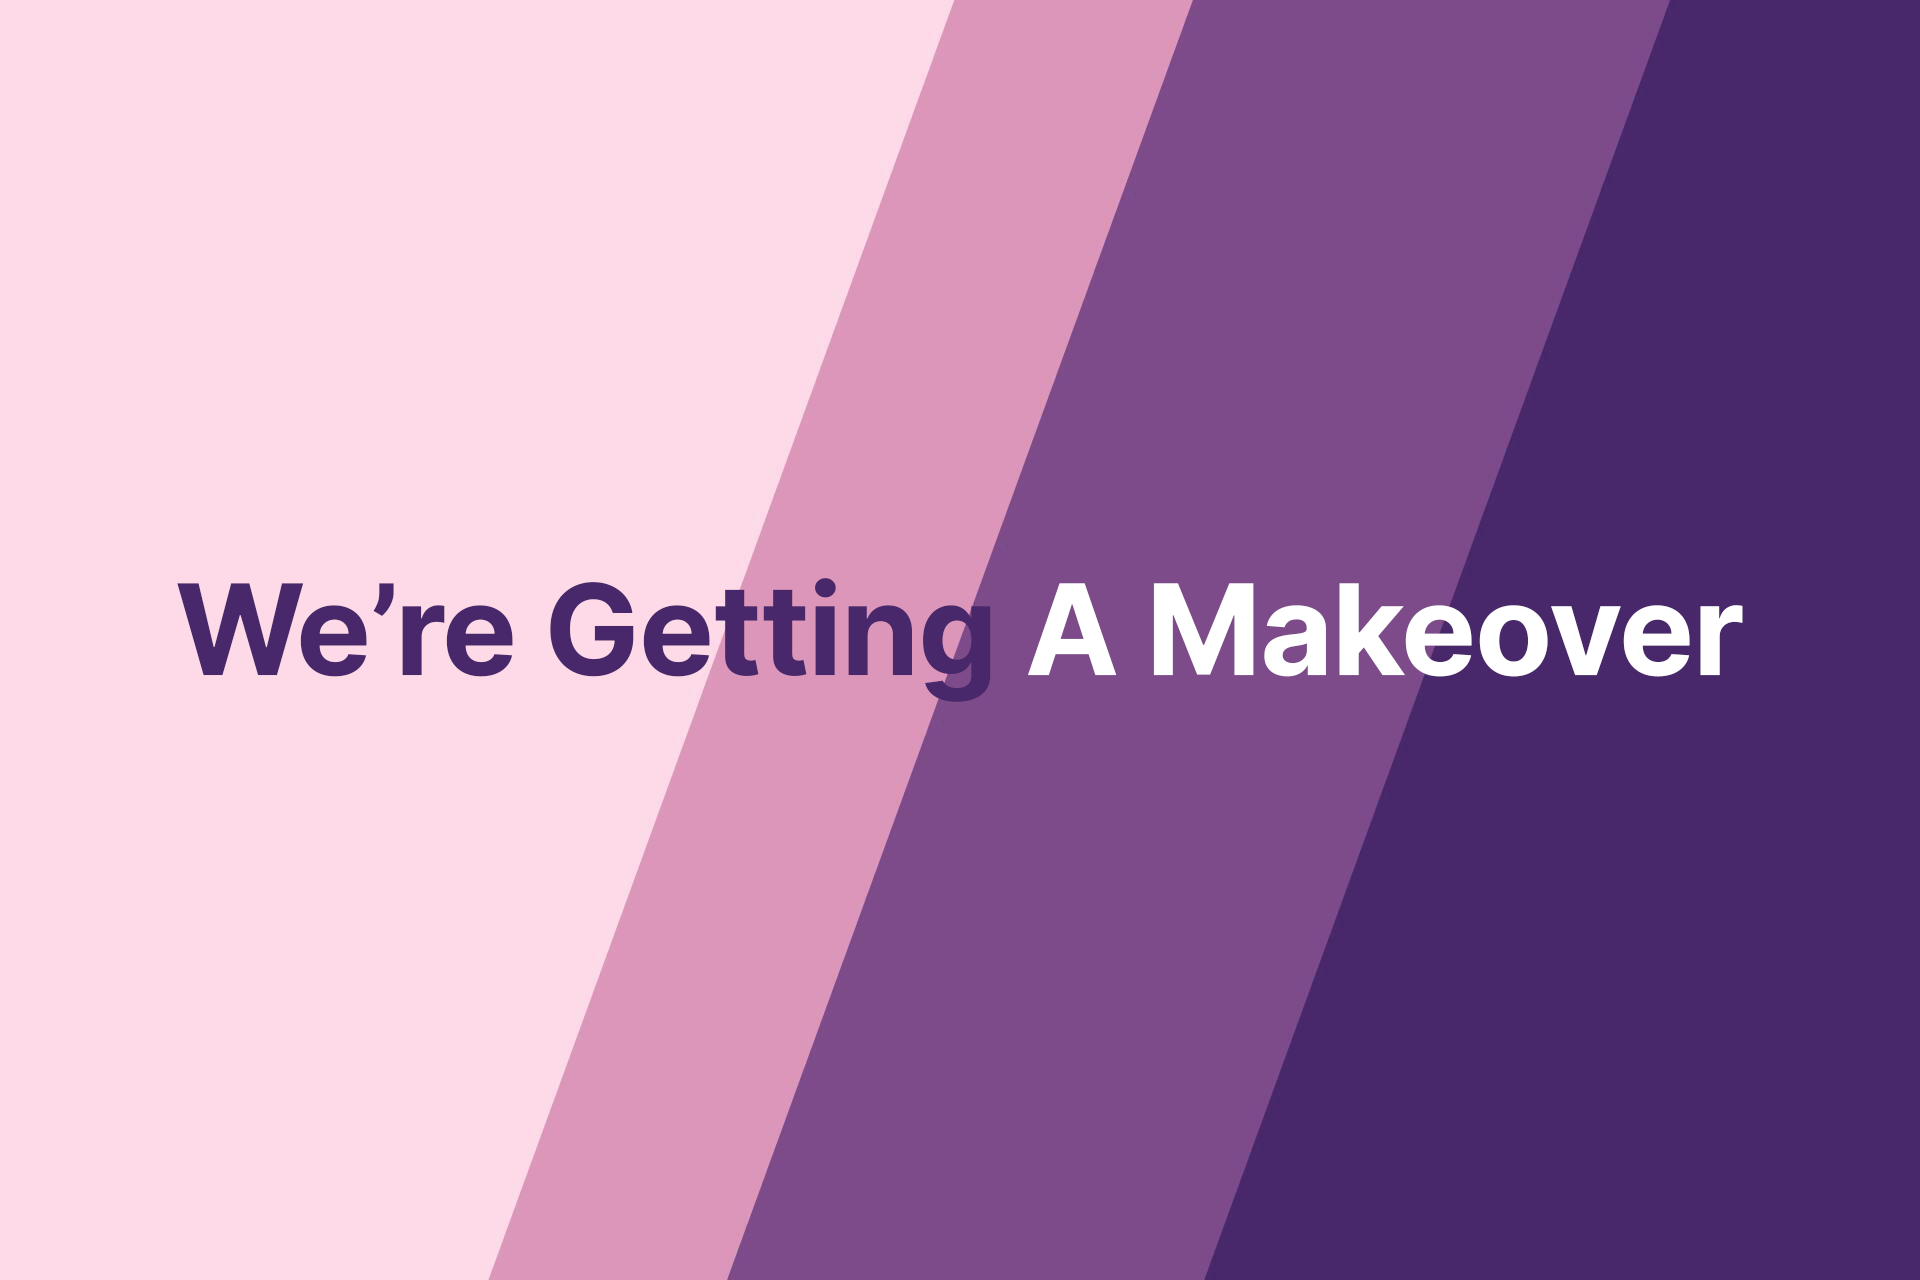 We're Getting A Makeover!